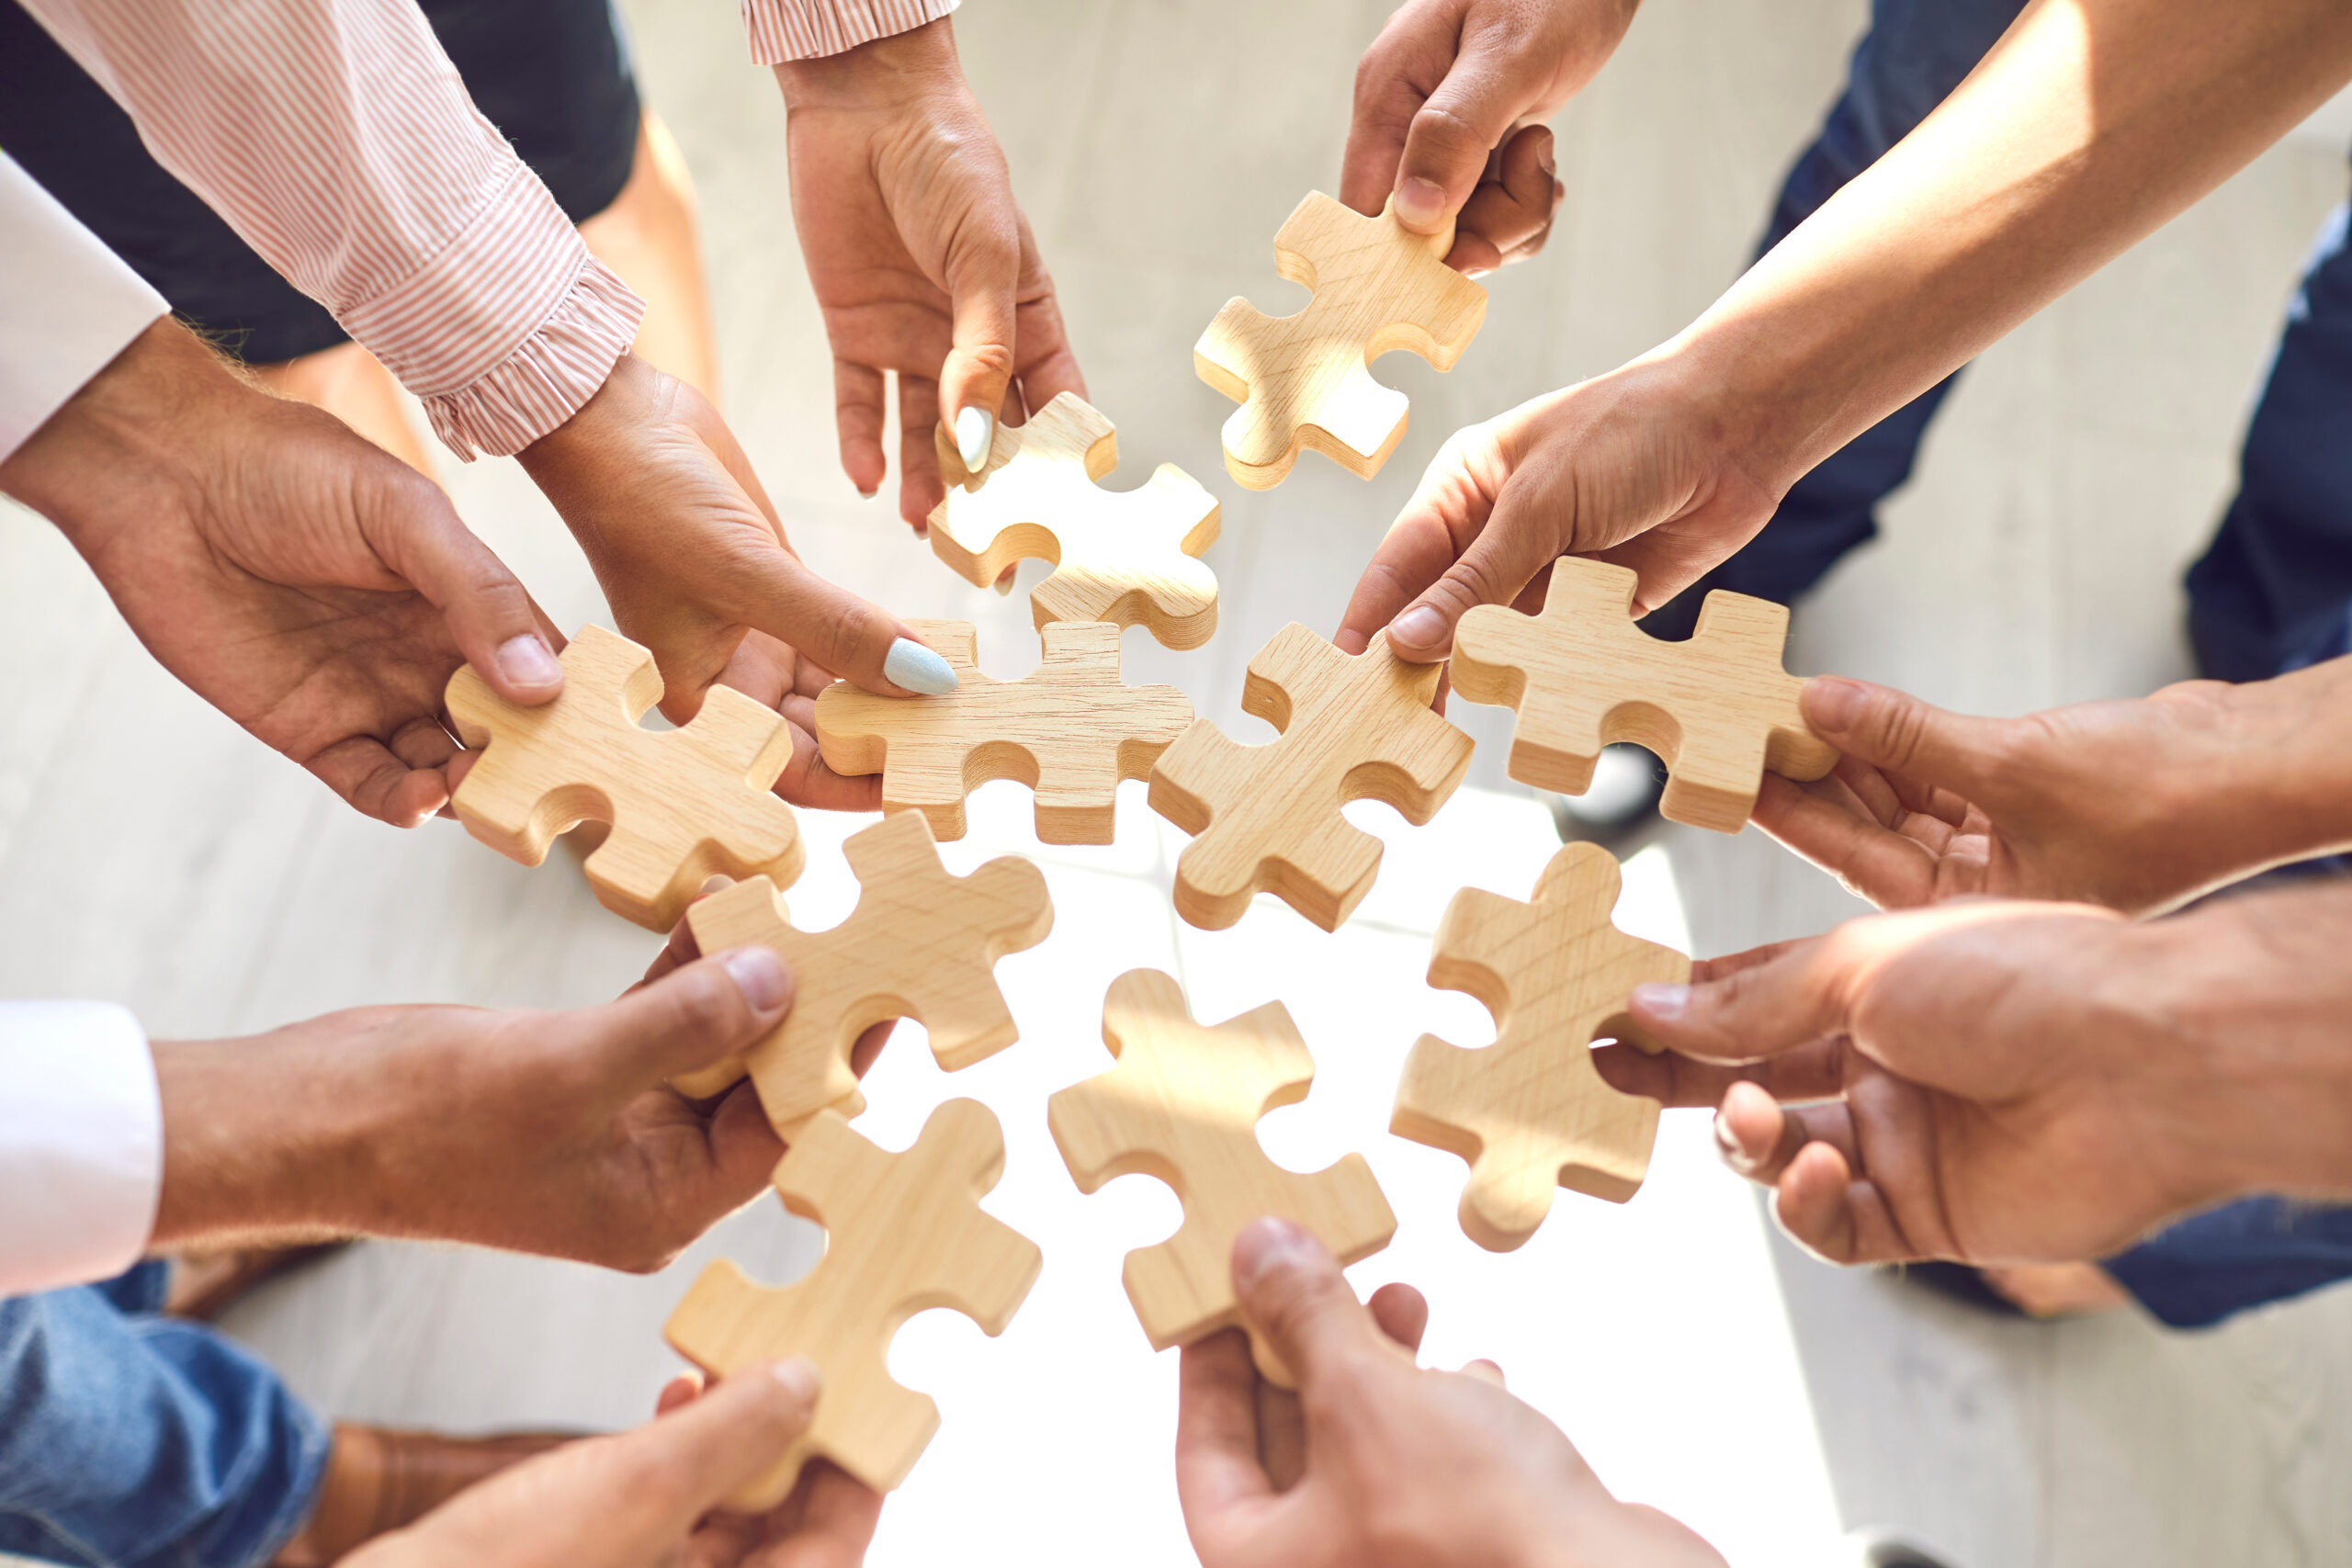 Members-of-the-project-team-all-holding-a-jigsaw-puzzle-piece-of-change-management-process